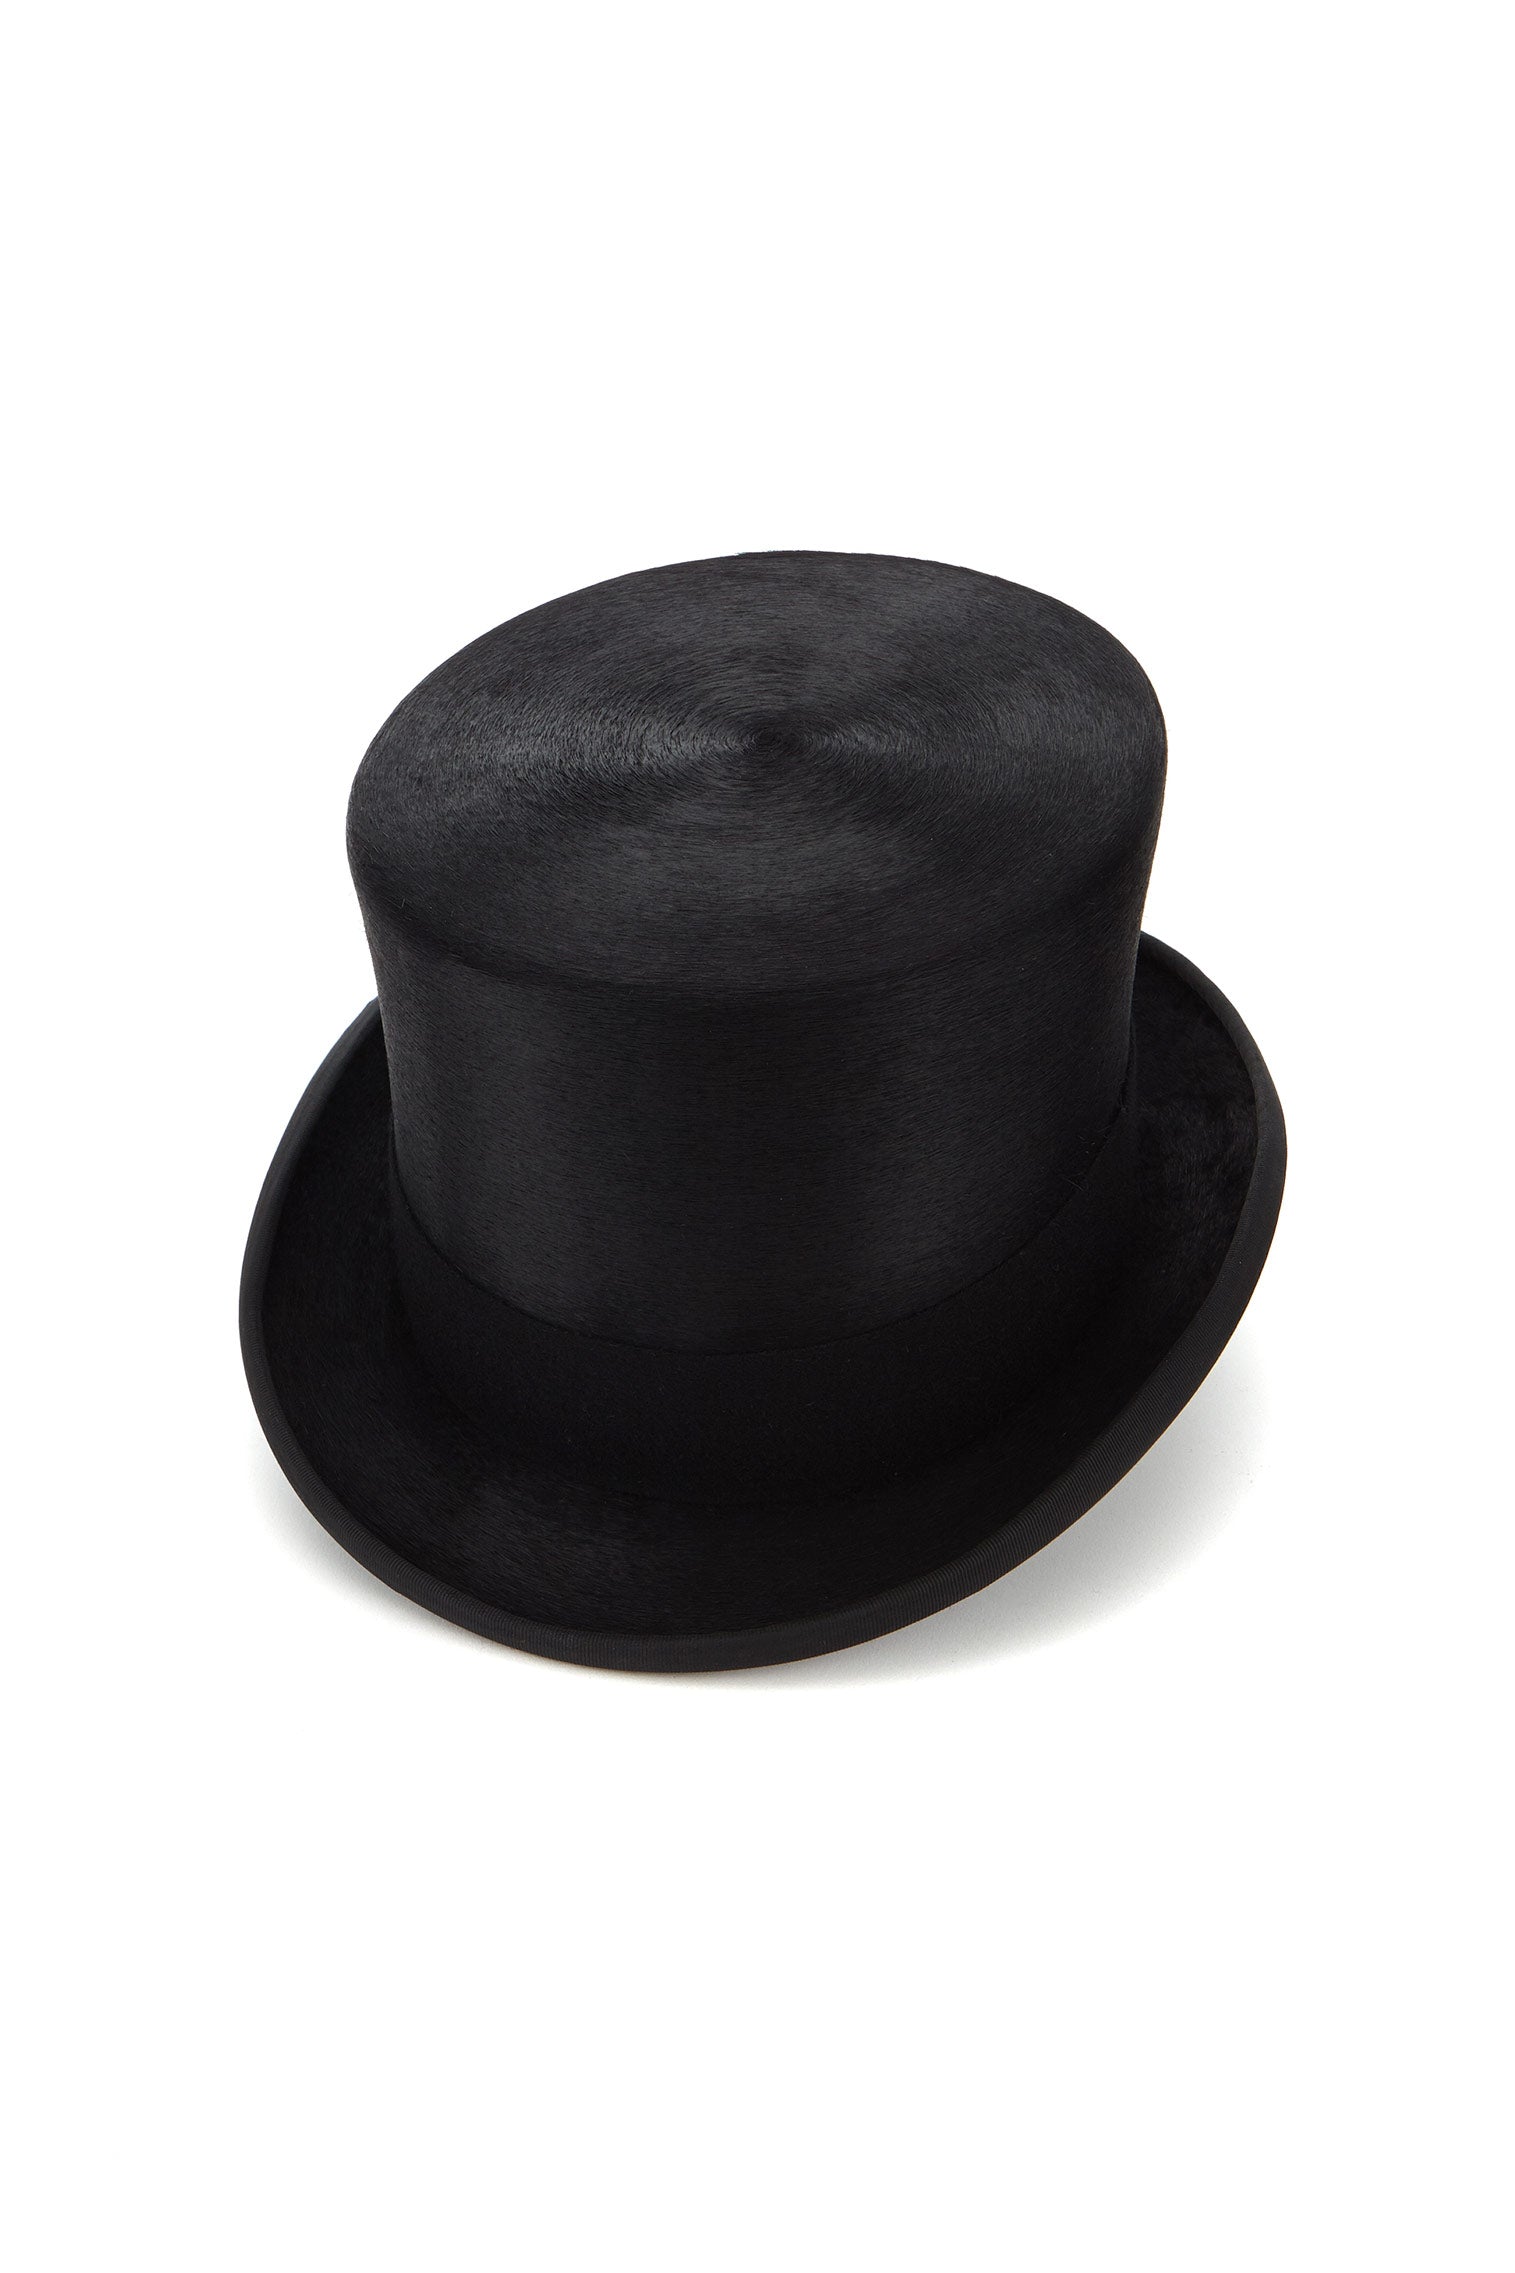 Westminster Top Hat - Royal Ascot Hats - Lock & Co. Hatters London UK